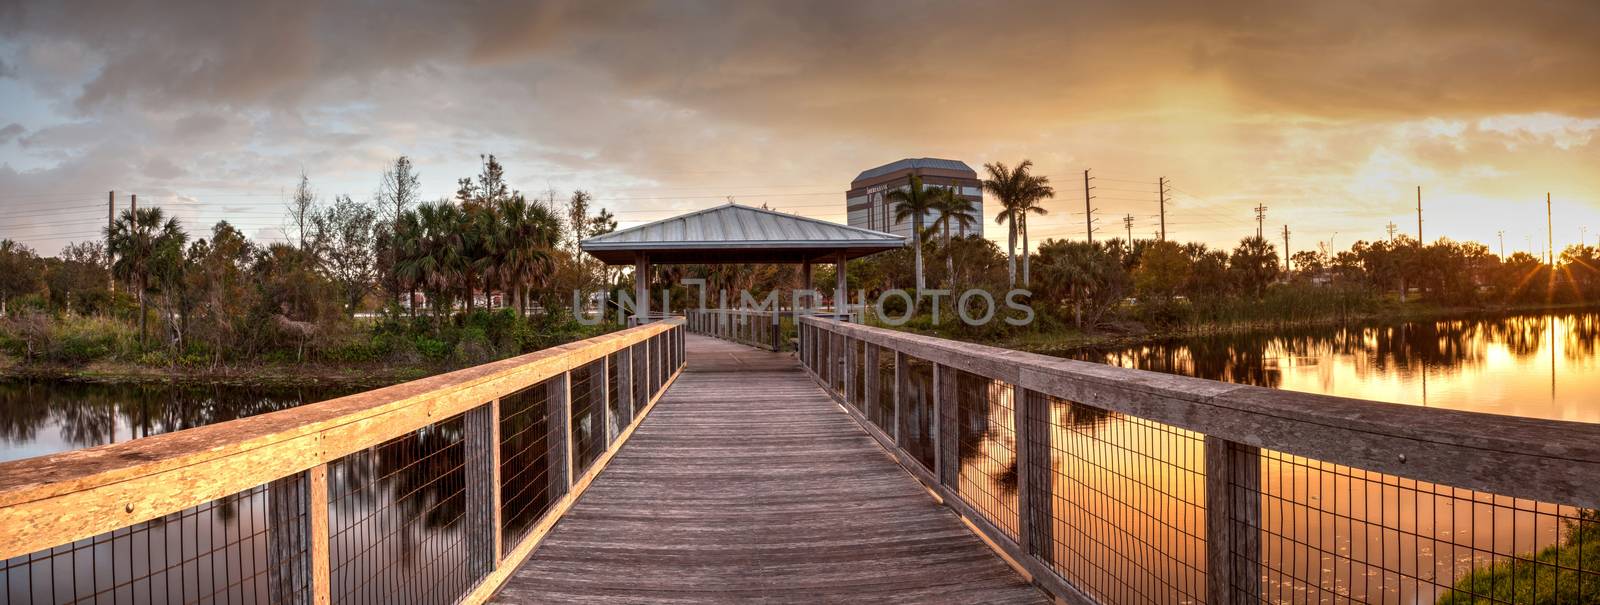 Sunset over Gazebo on a wooden secluded, tranquil boardwalk by steffstarr